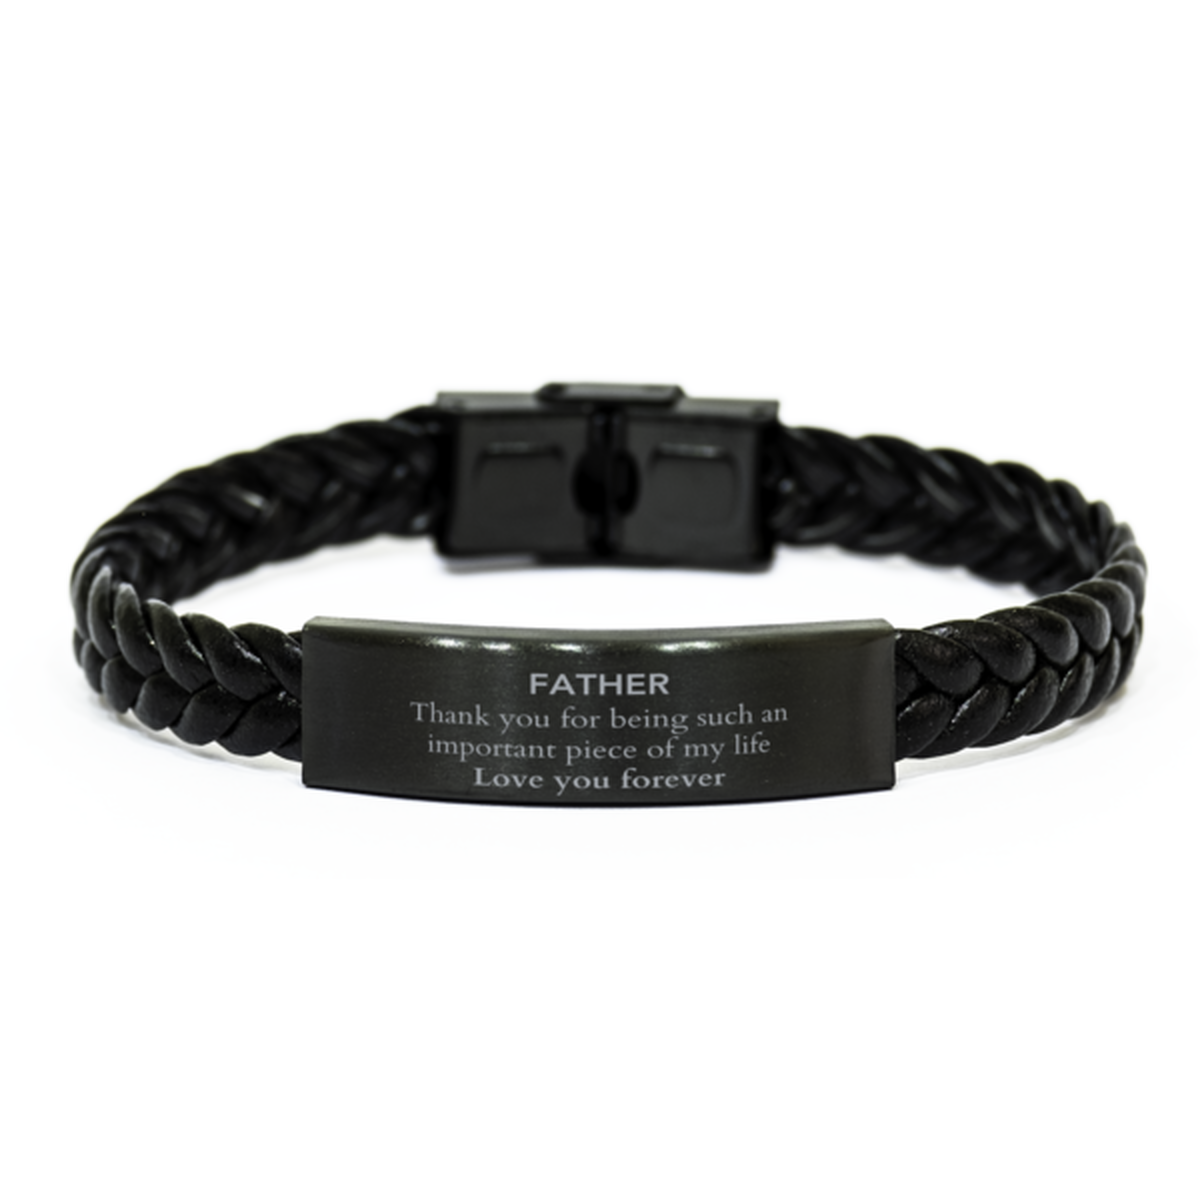 Appropriate Father Braided Leather Bracelet Epic Birthday Gifts for Father Thank you for being such an important piece of my life Father Christmas Mothers Fathers Day